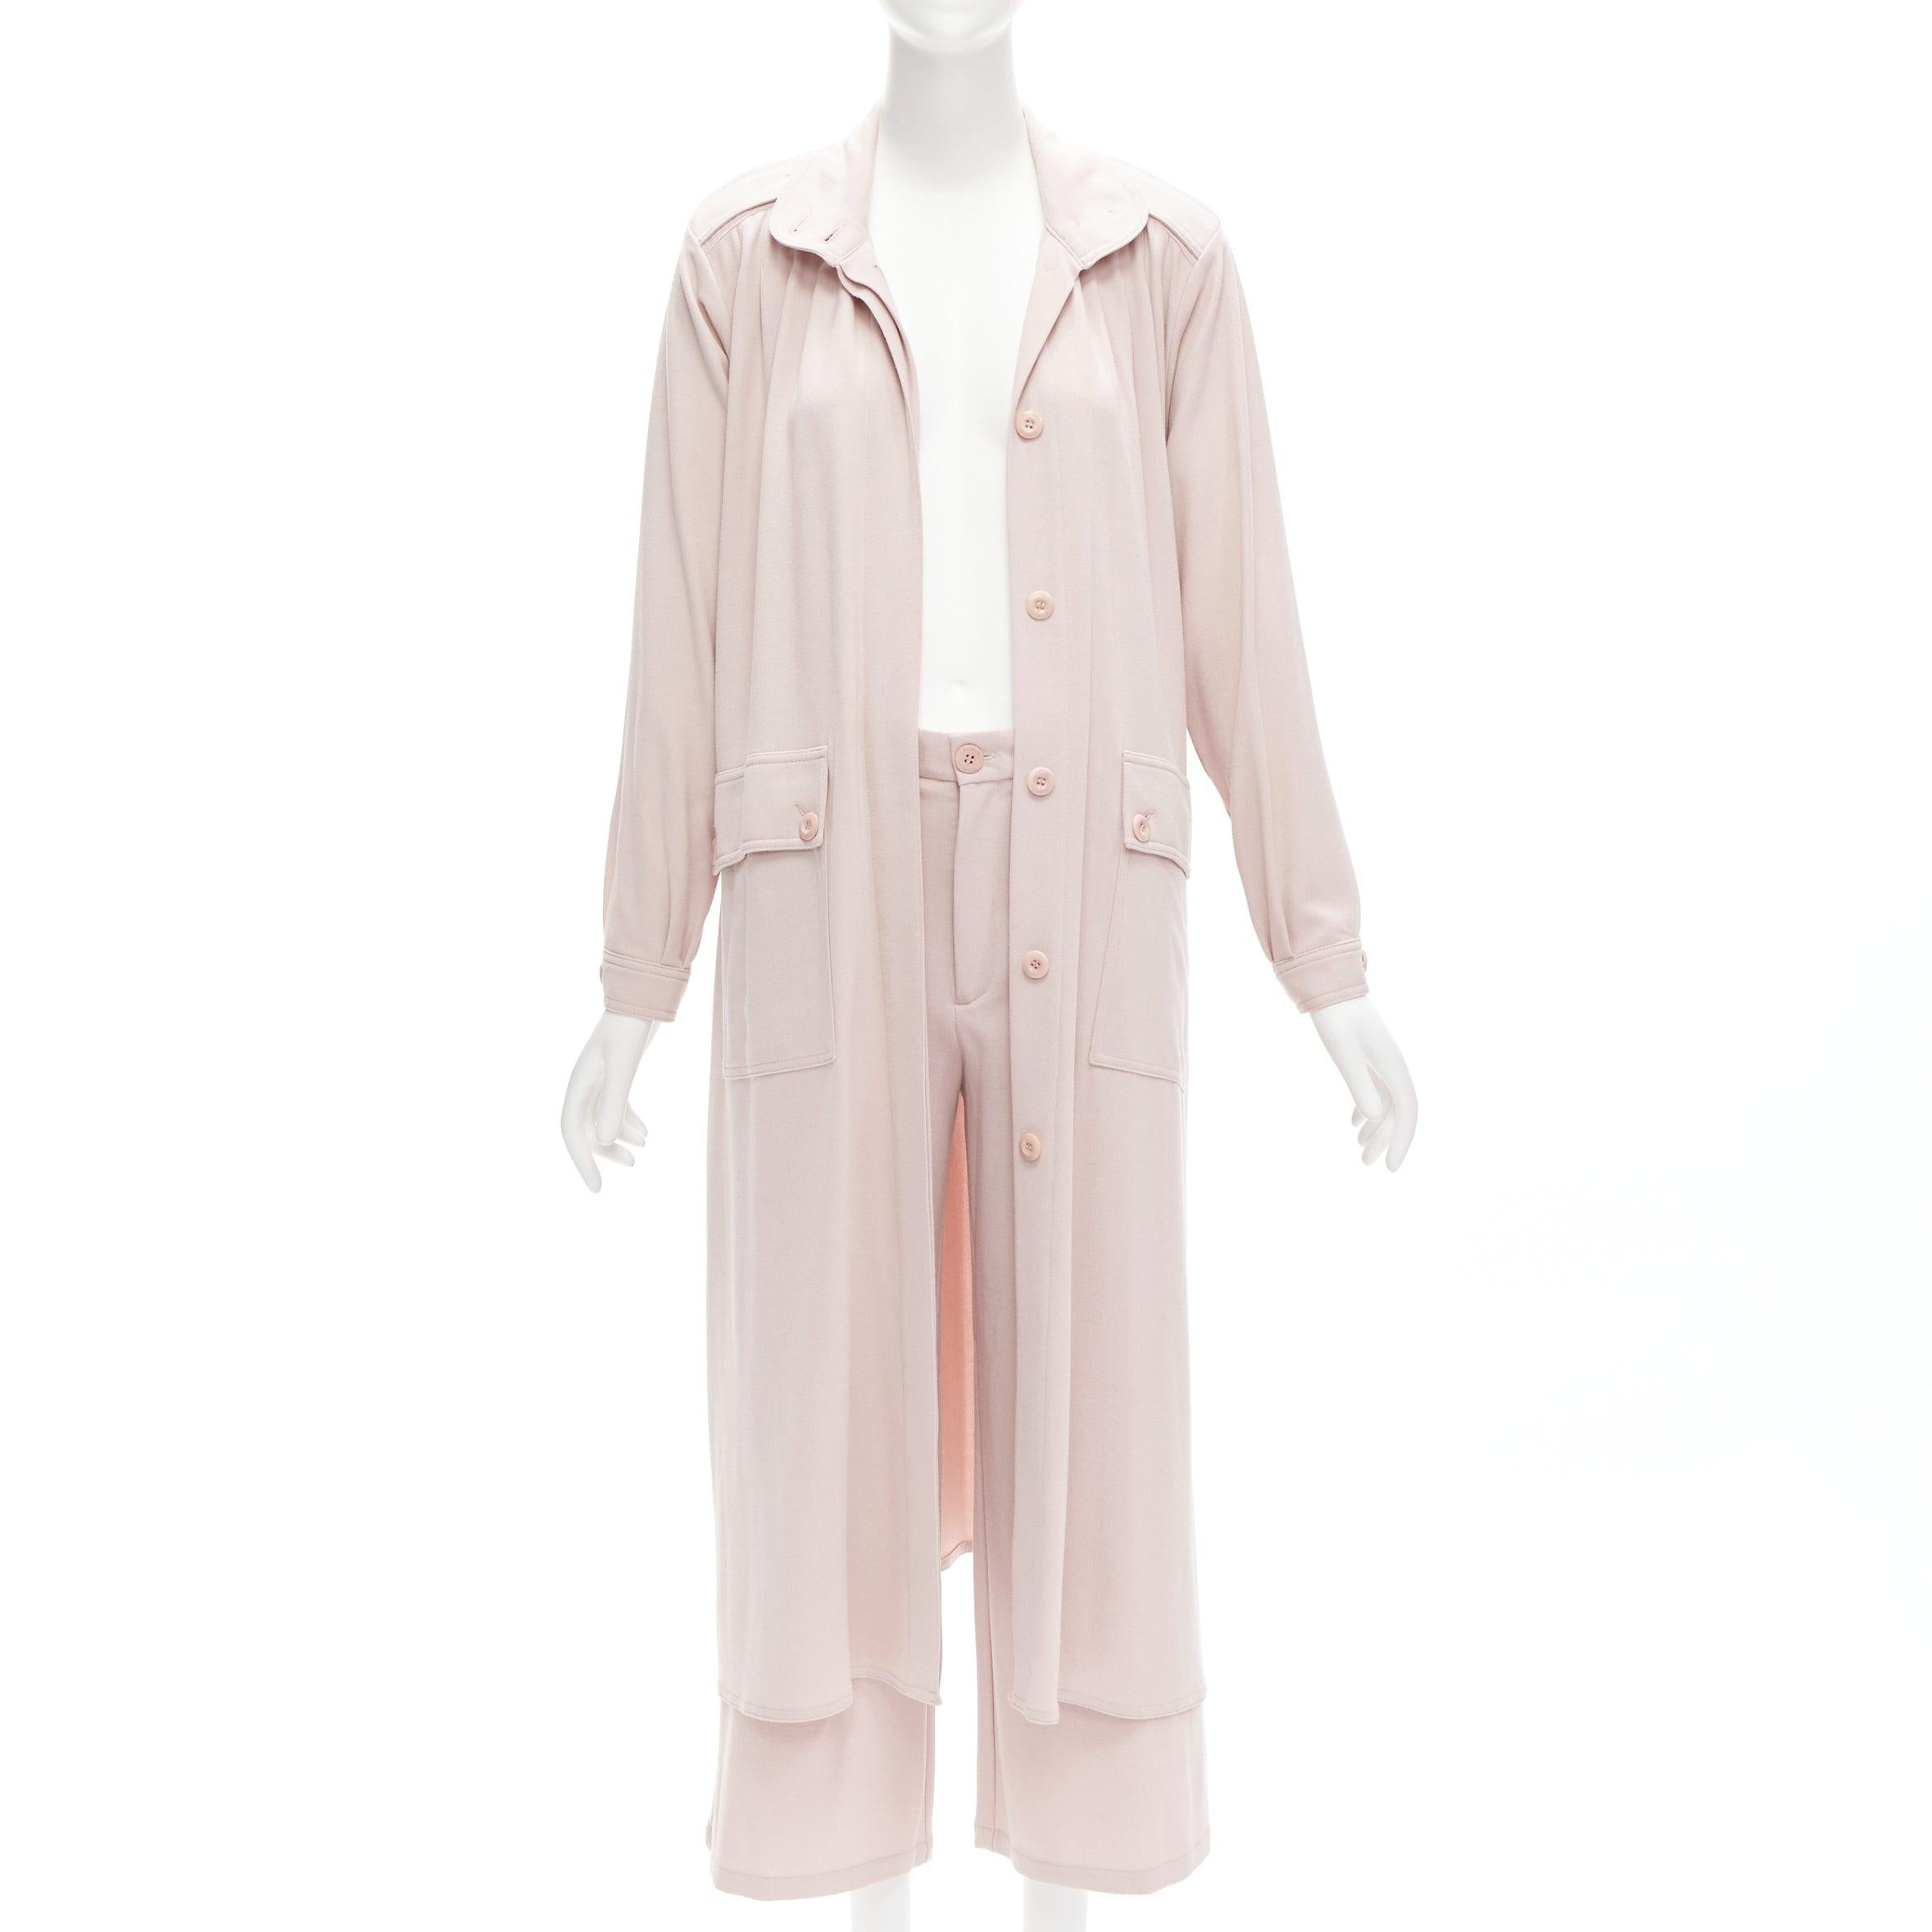 RODEBJER Odessa dusty pink belted long line robe jacket wide pants set XS
Reference: CELG/A00370
Brand: Rodebjer
Material: Polyester, Blend
Color: Pink
Pattern: Solid
Closure: Belt
Made in: Lithuania

CONDITION:
Condition: Good, this item was